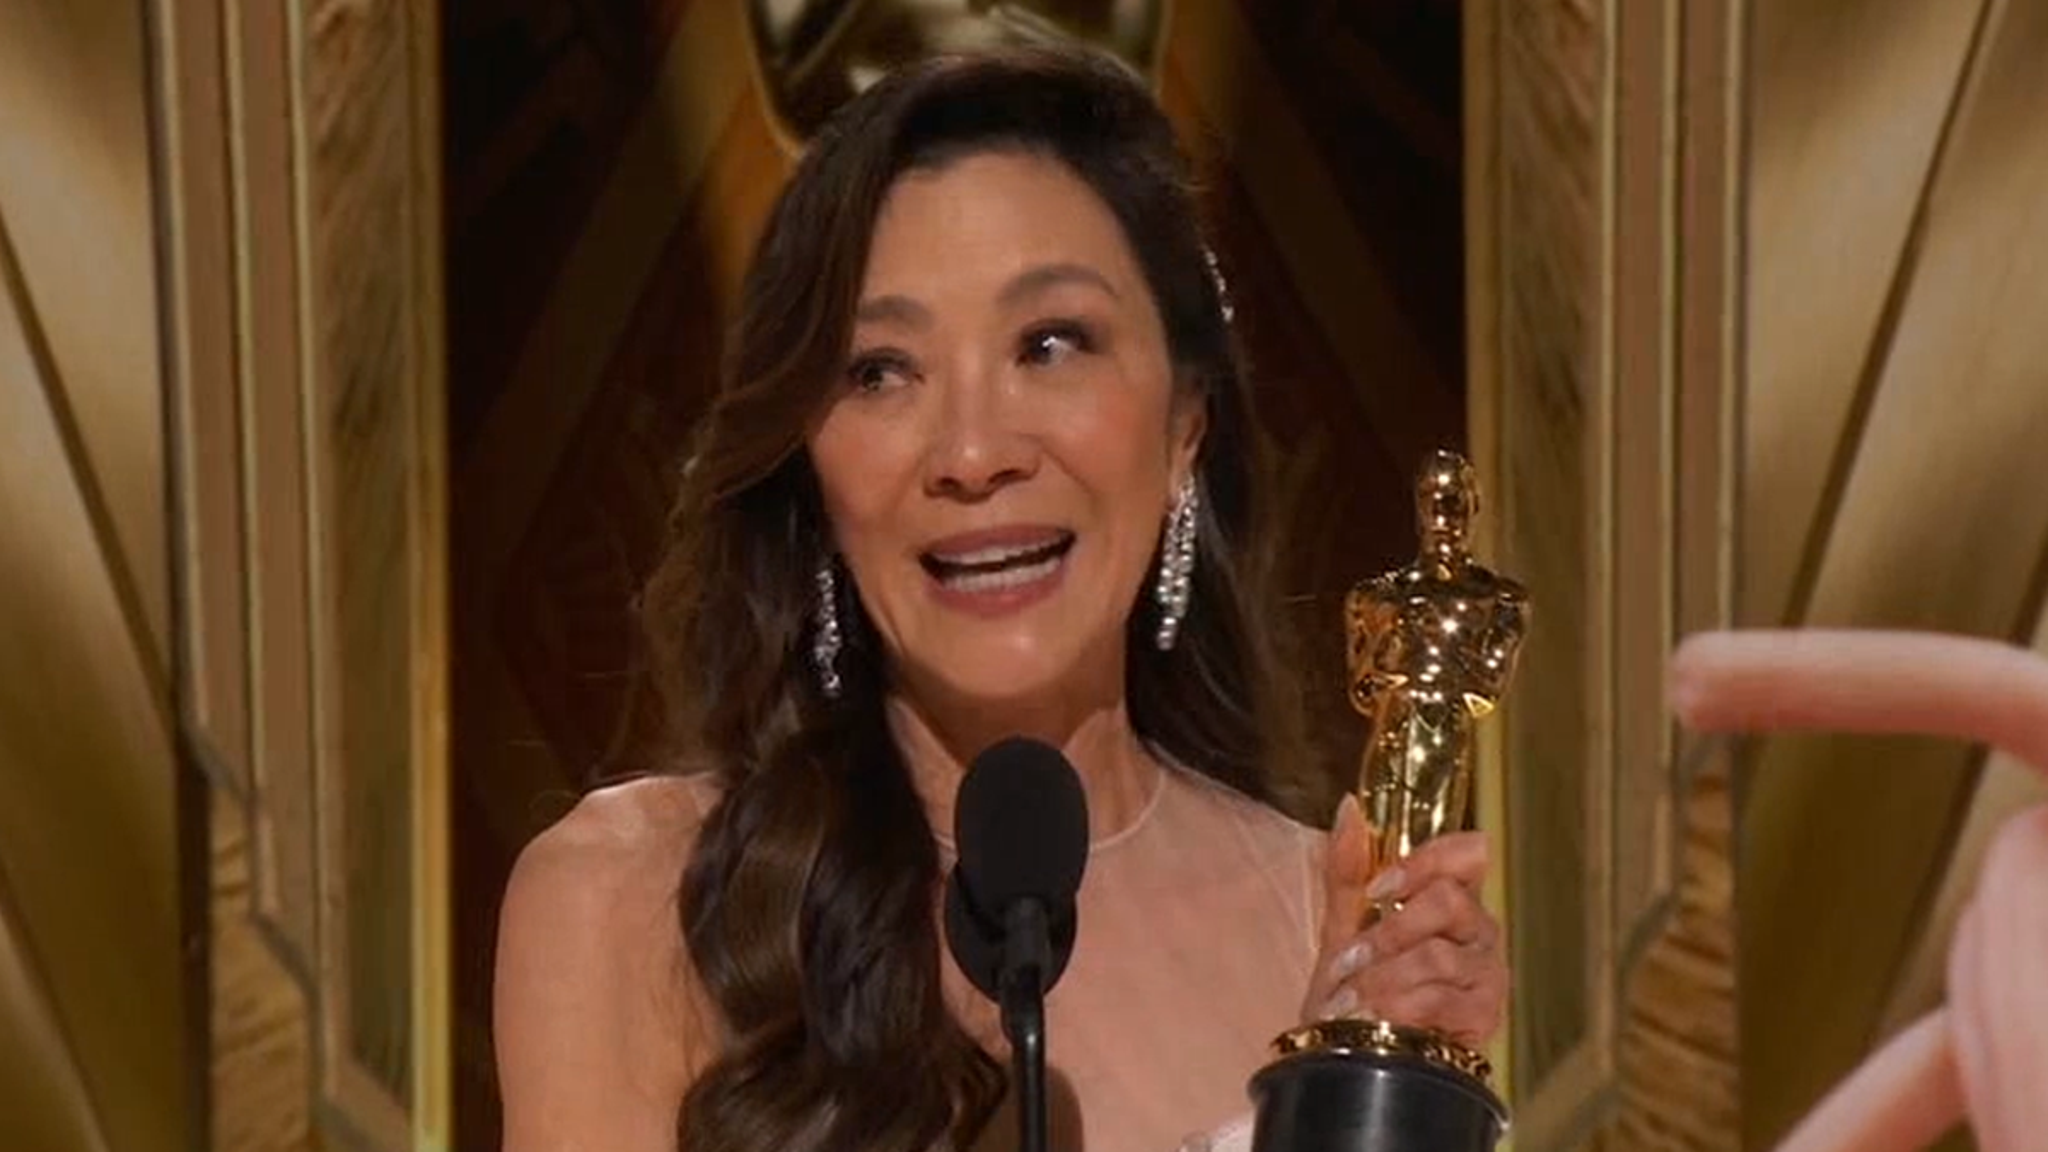 Michelle Yeoh Takes 'Prime' Swipe at Don Lemon After Best Actress Oscar Win